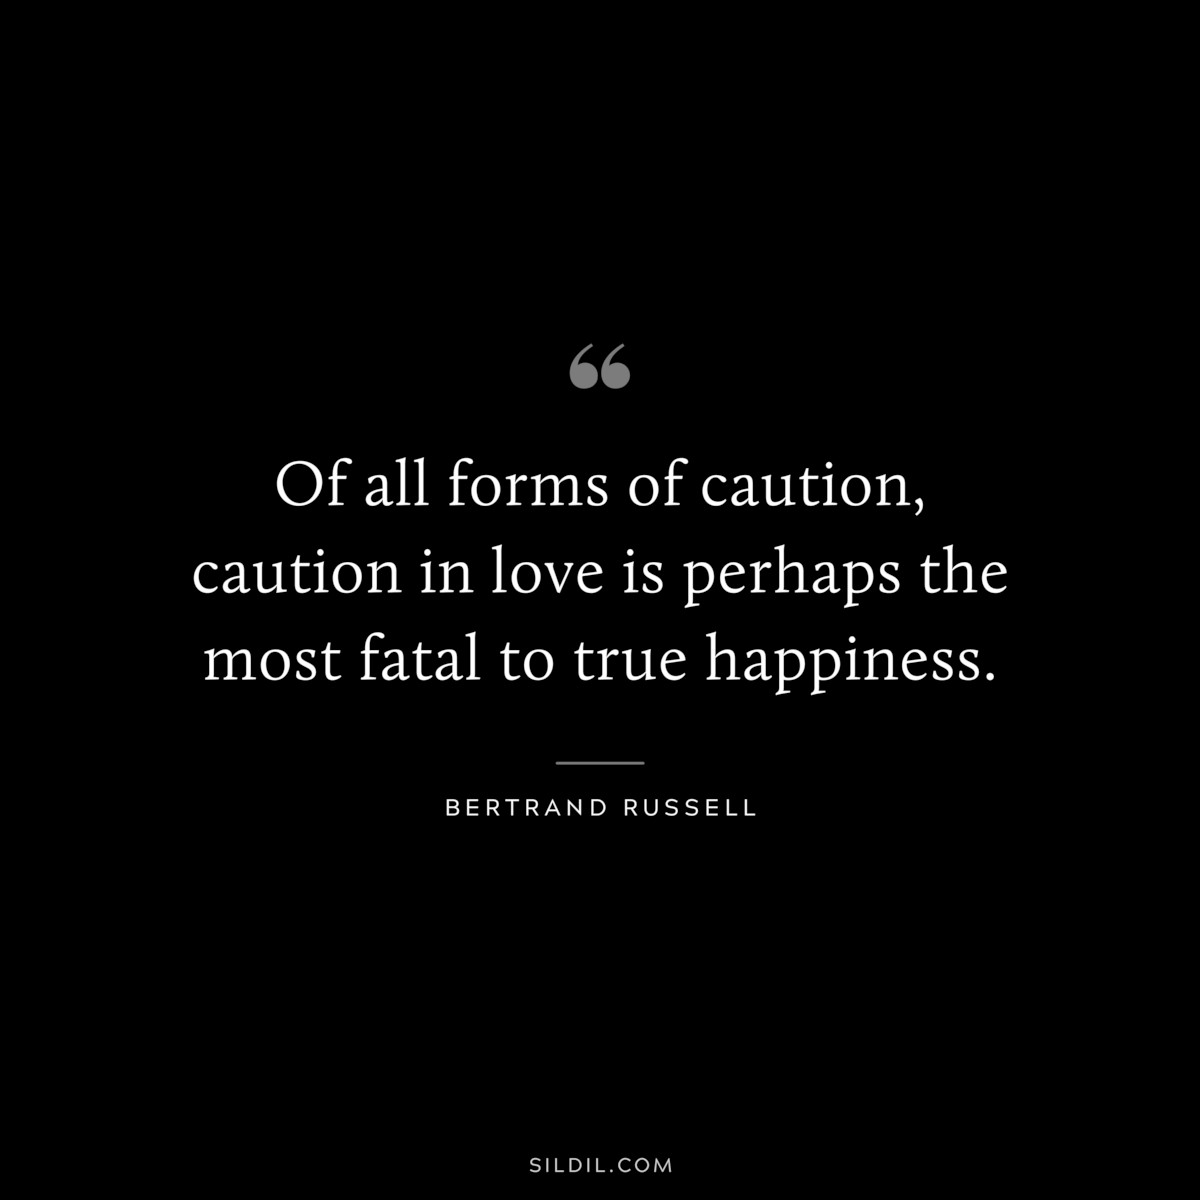 Of all forms of caution, caution in love is perhaps the most fatal to true happiness. ― Bertrand Russell